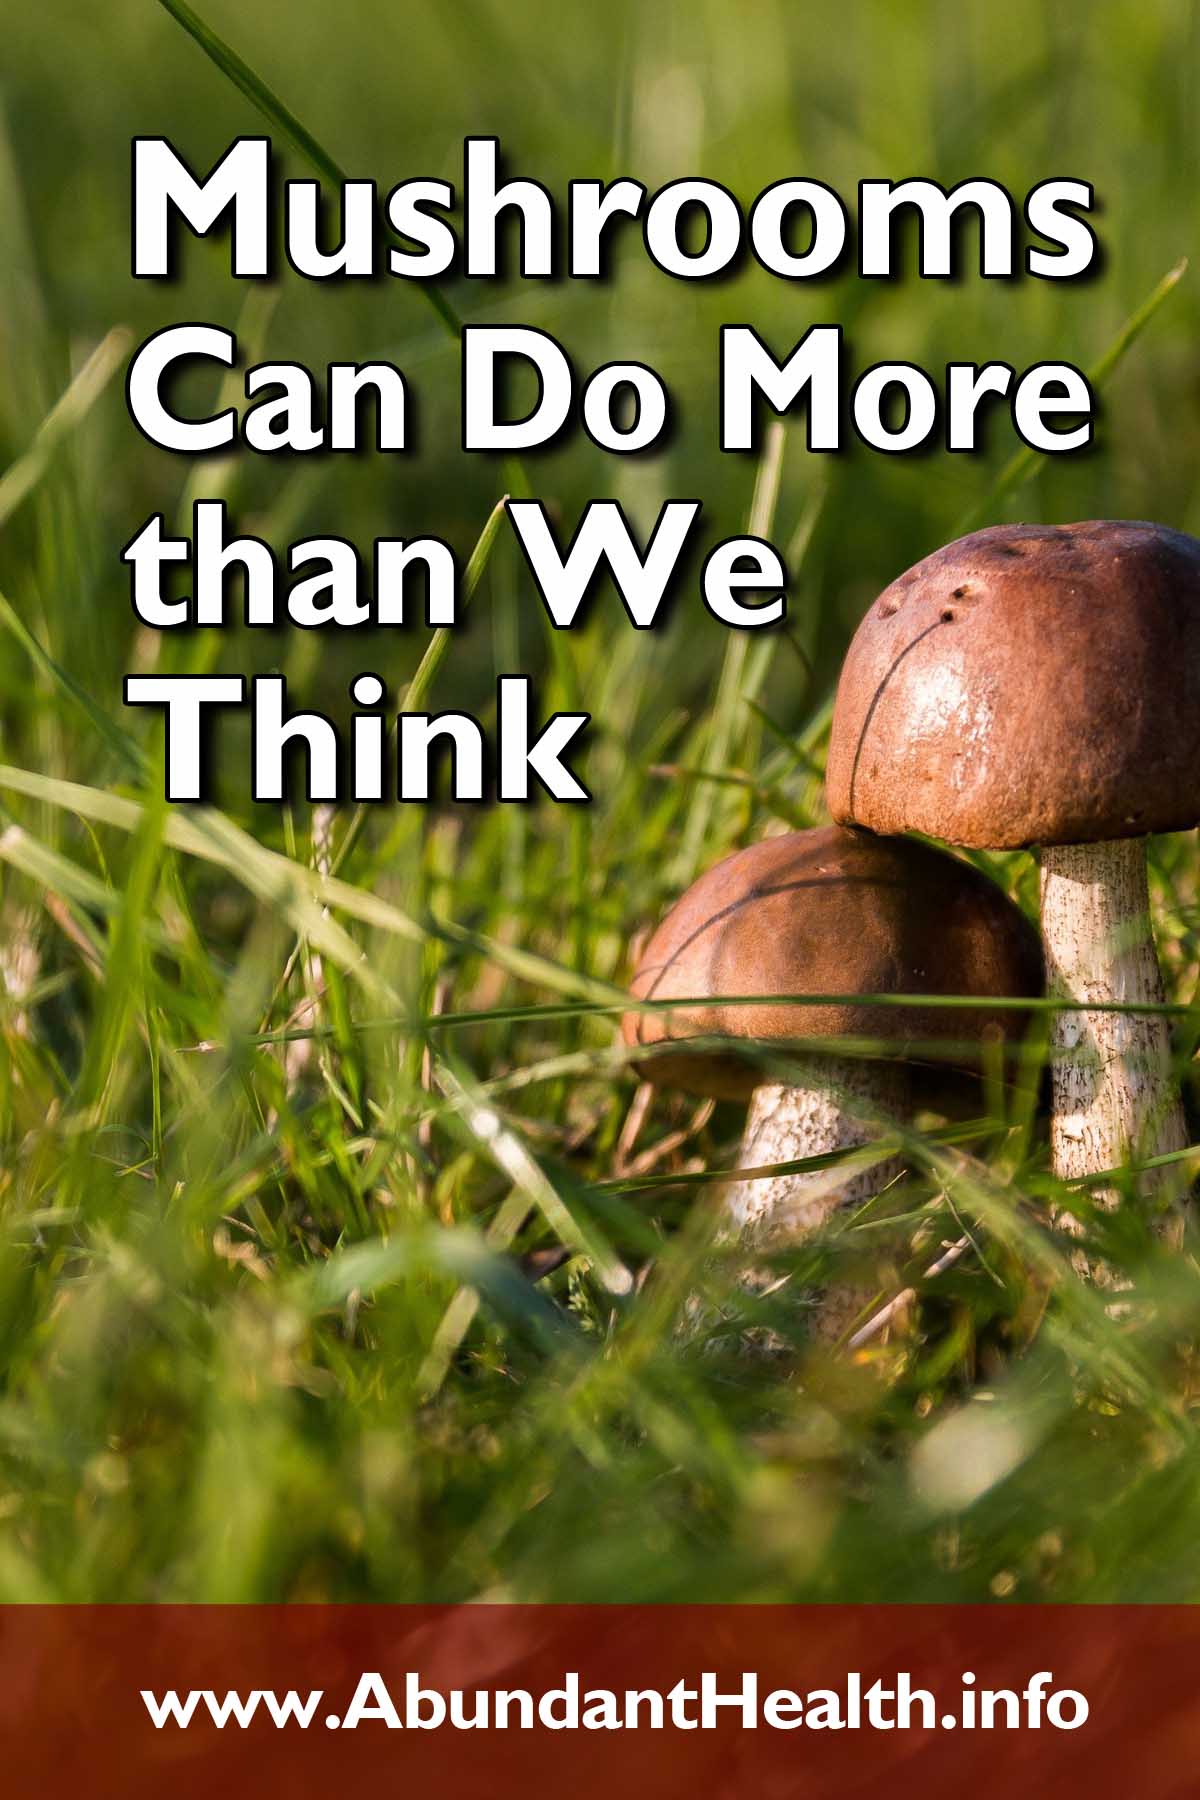 Mushrooms Can Do More than We Think